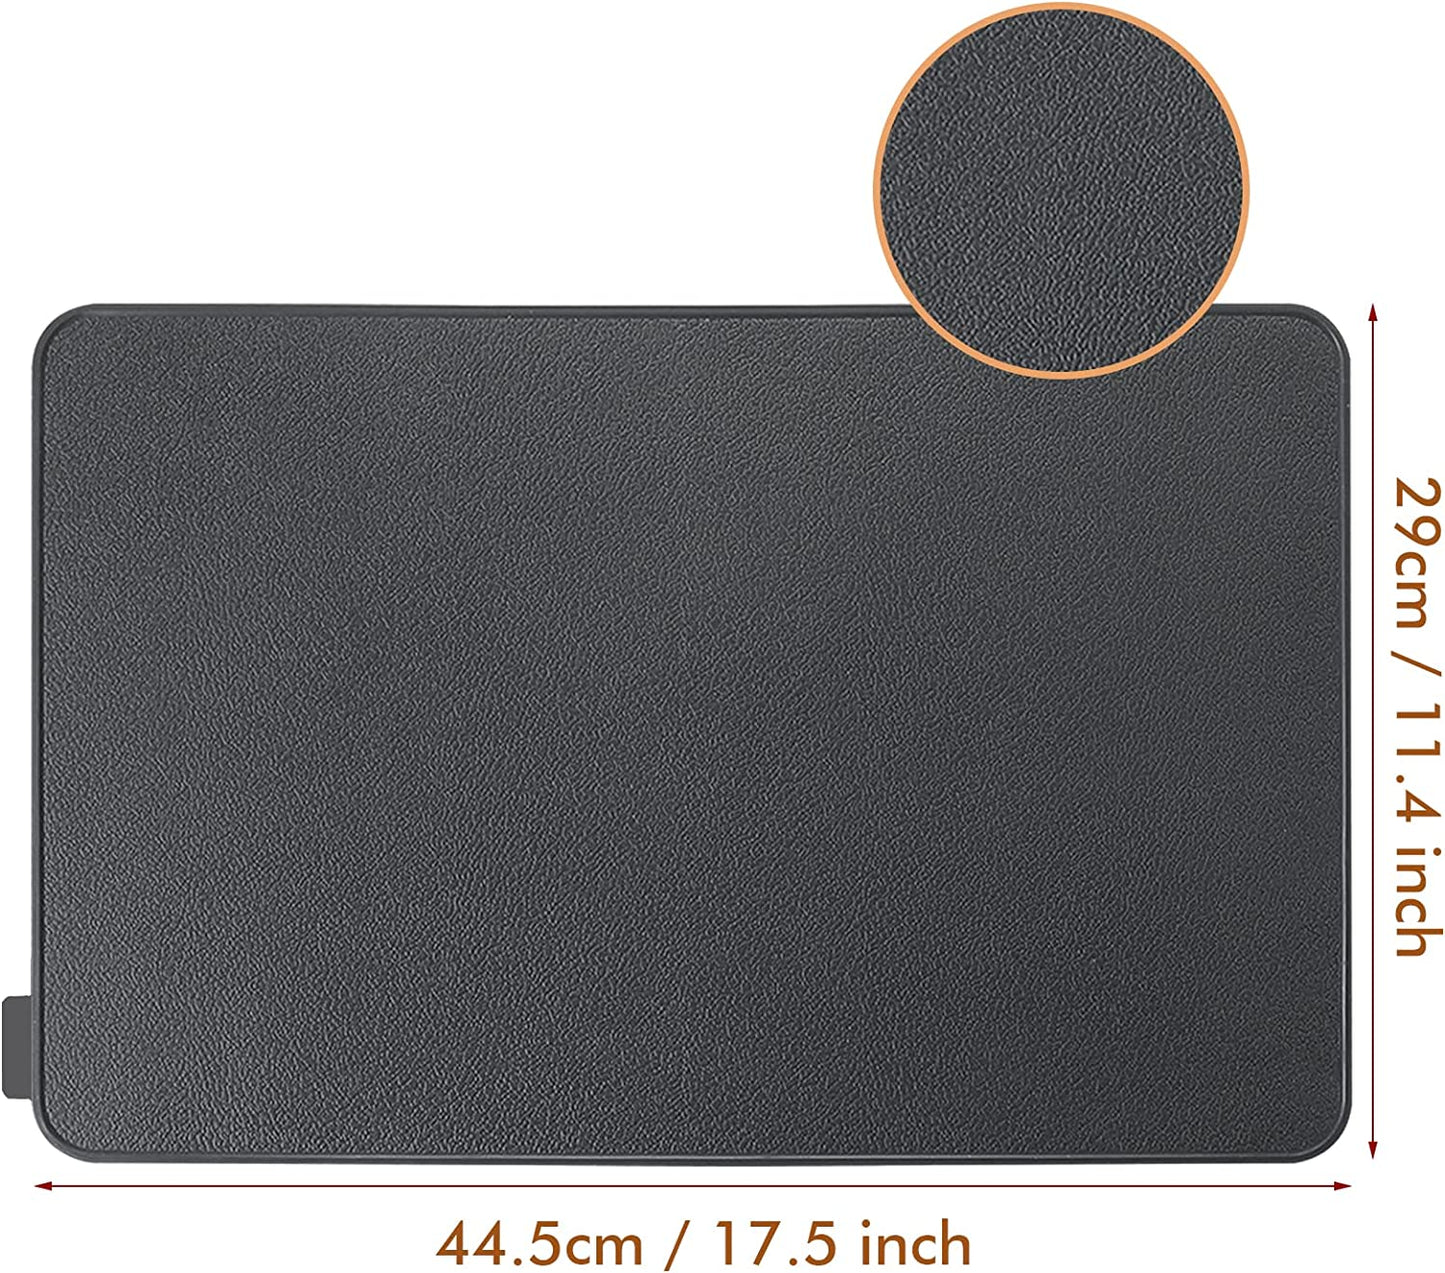 Webake 17.5 x 11.4 inch silicone heat resistant waterproof insulation washable table placemats,Set of 2